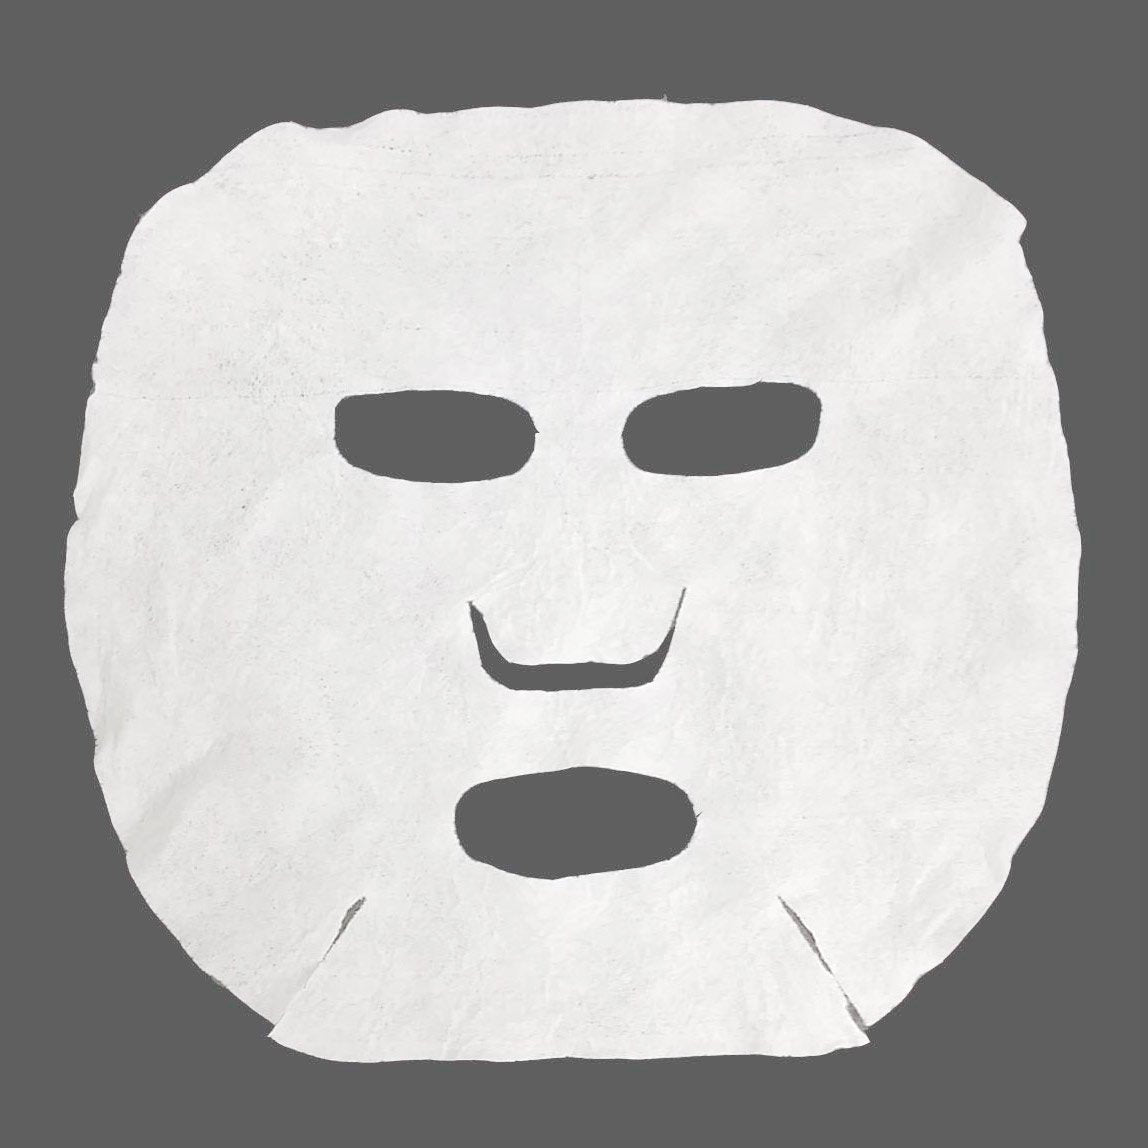 An Alteya Organics Cellulose Face Masks - Pack of 2 on a gray background.